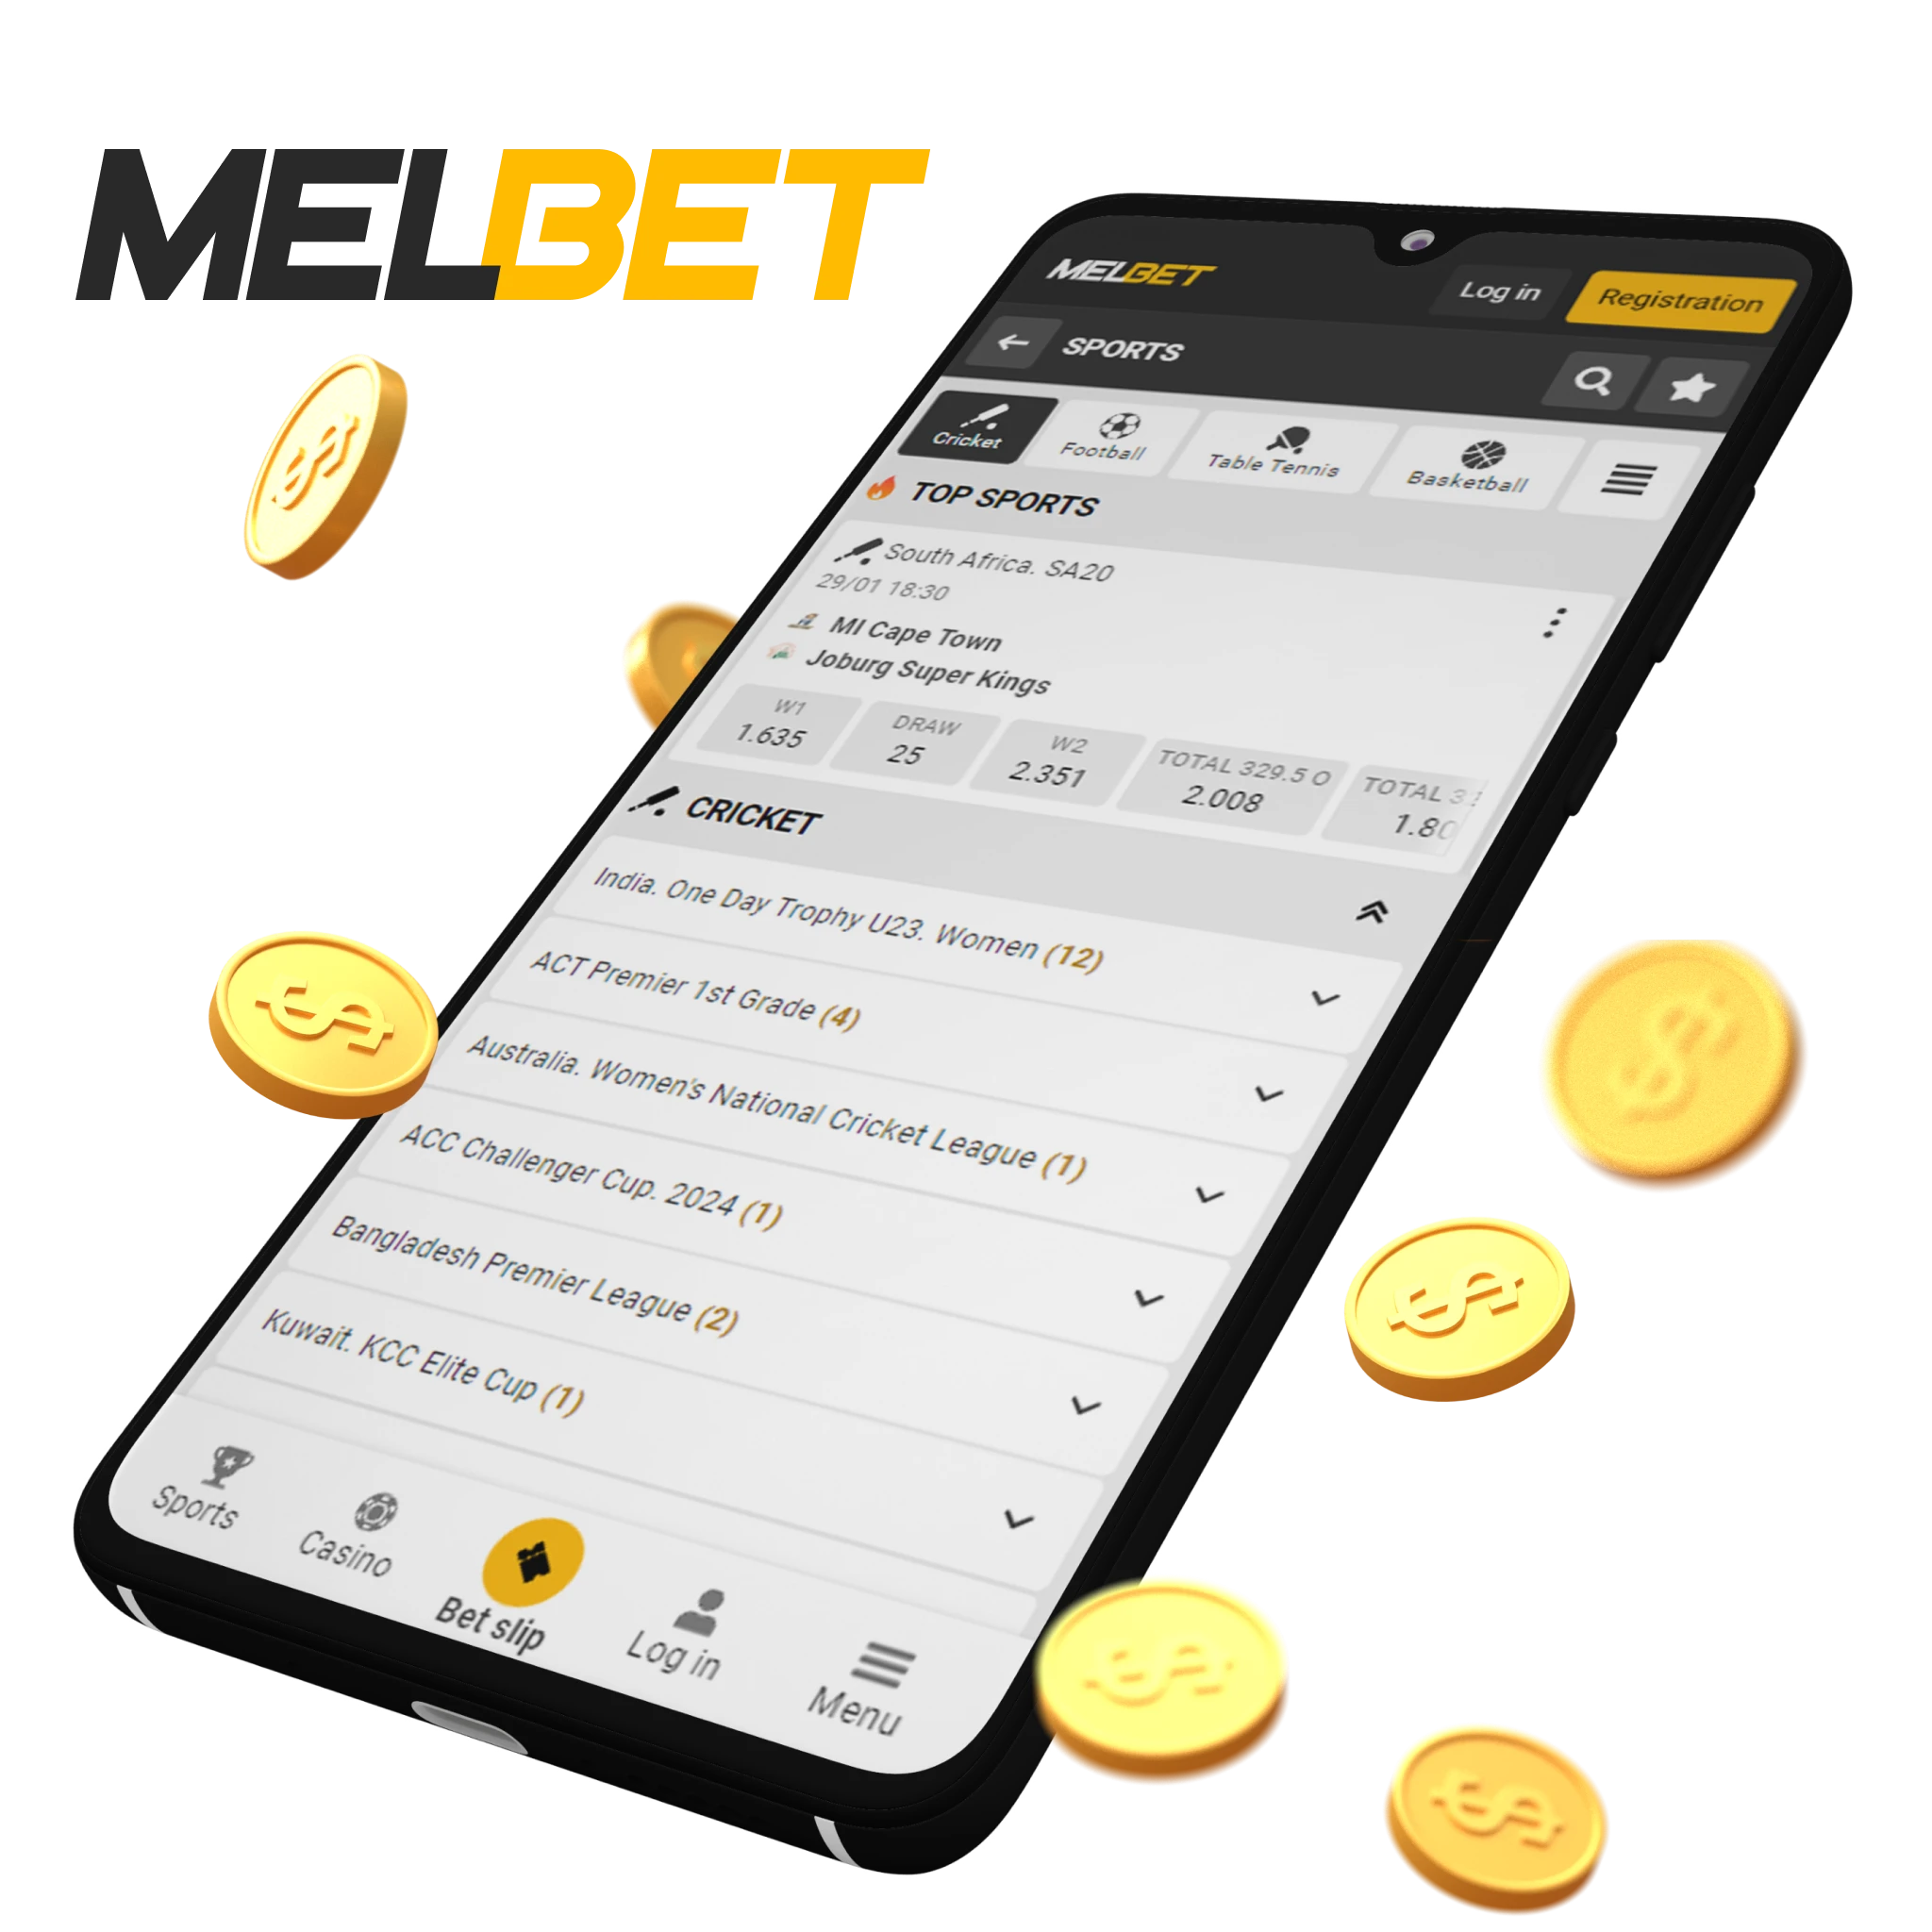 The Melbet app is designed according to all the latest technologies for real money cricket betting.